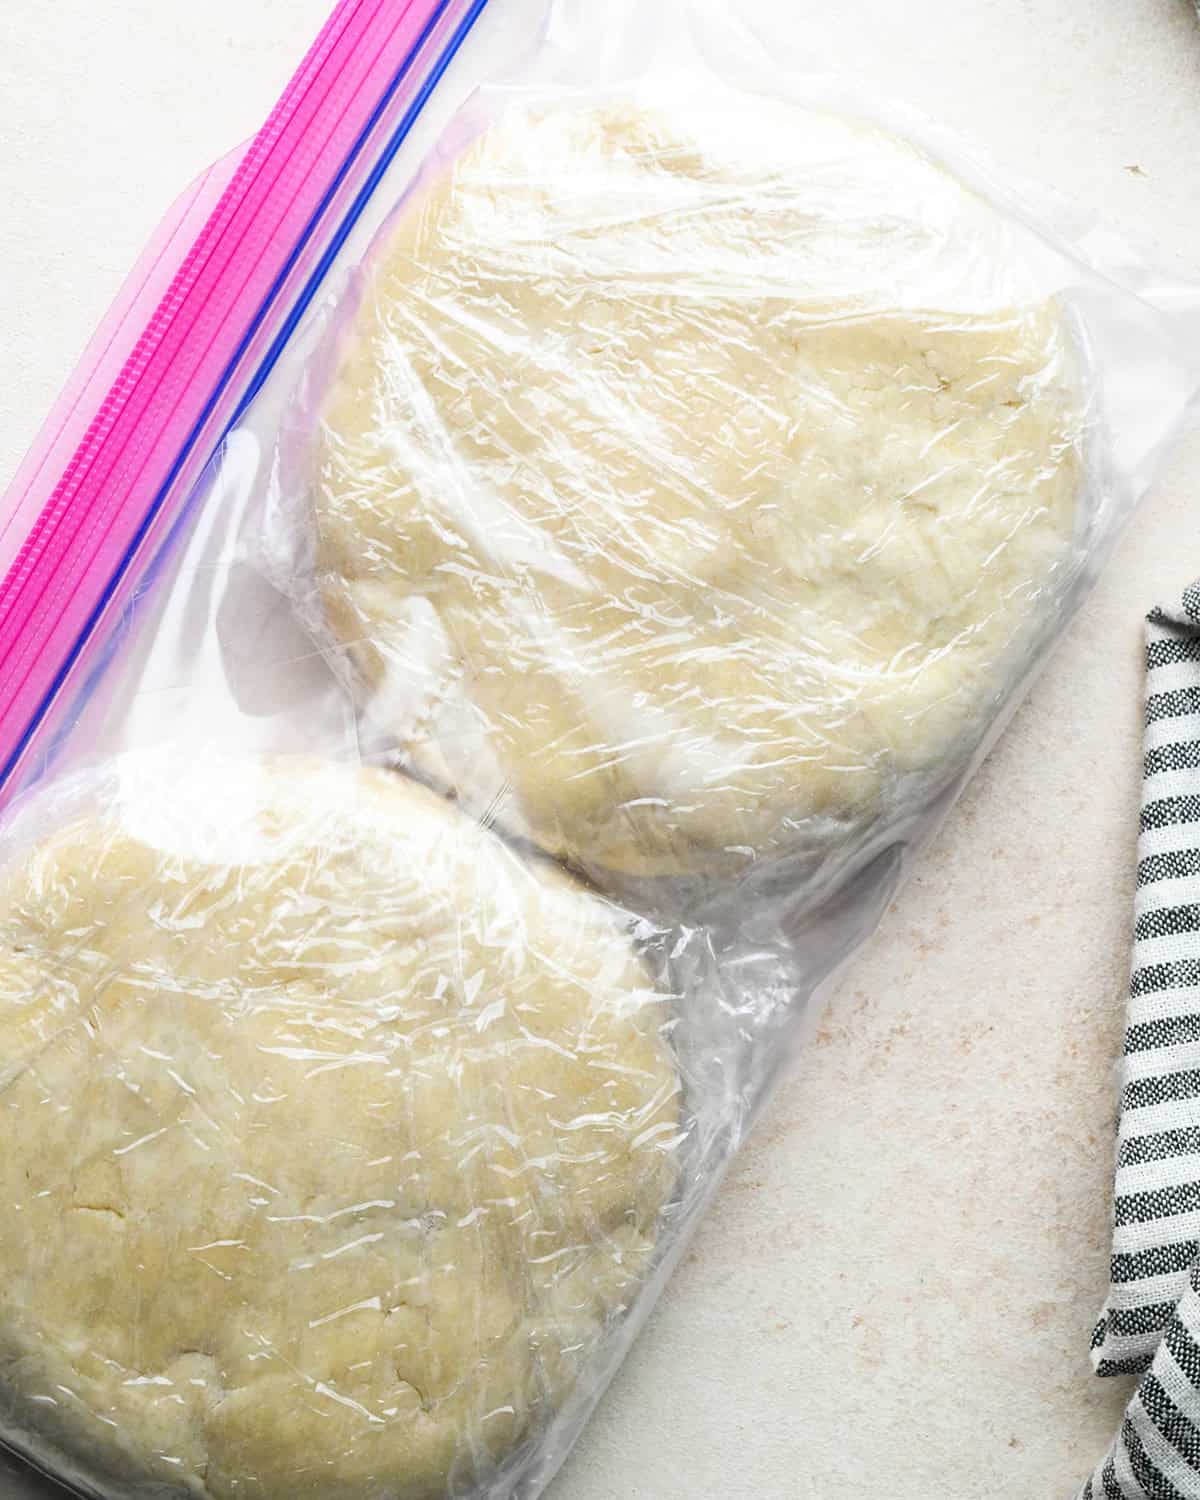 quiche crust dough formed into two round discs wrapped in plastic wrap in a plastic bag